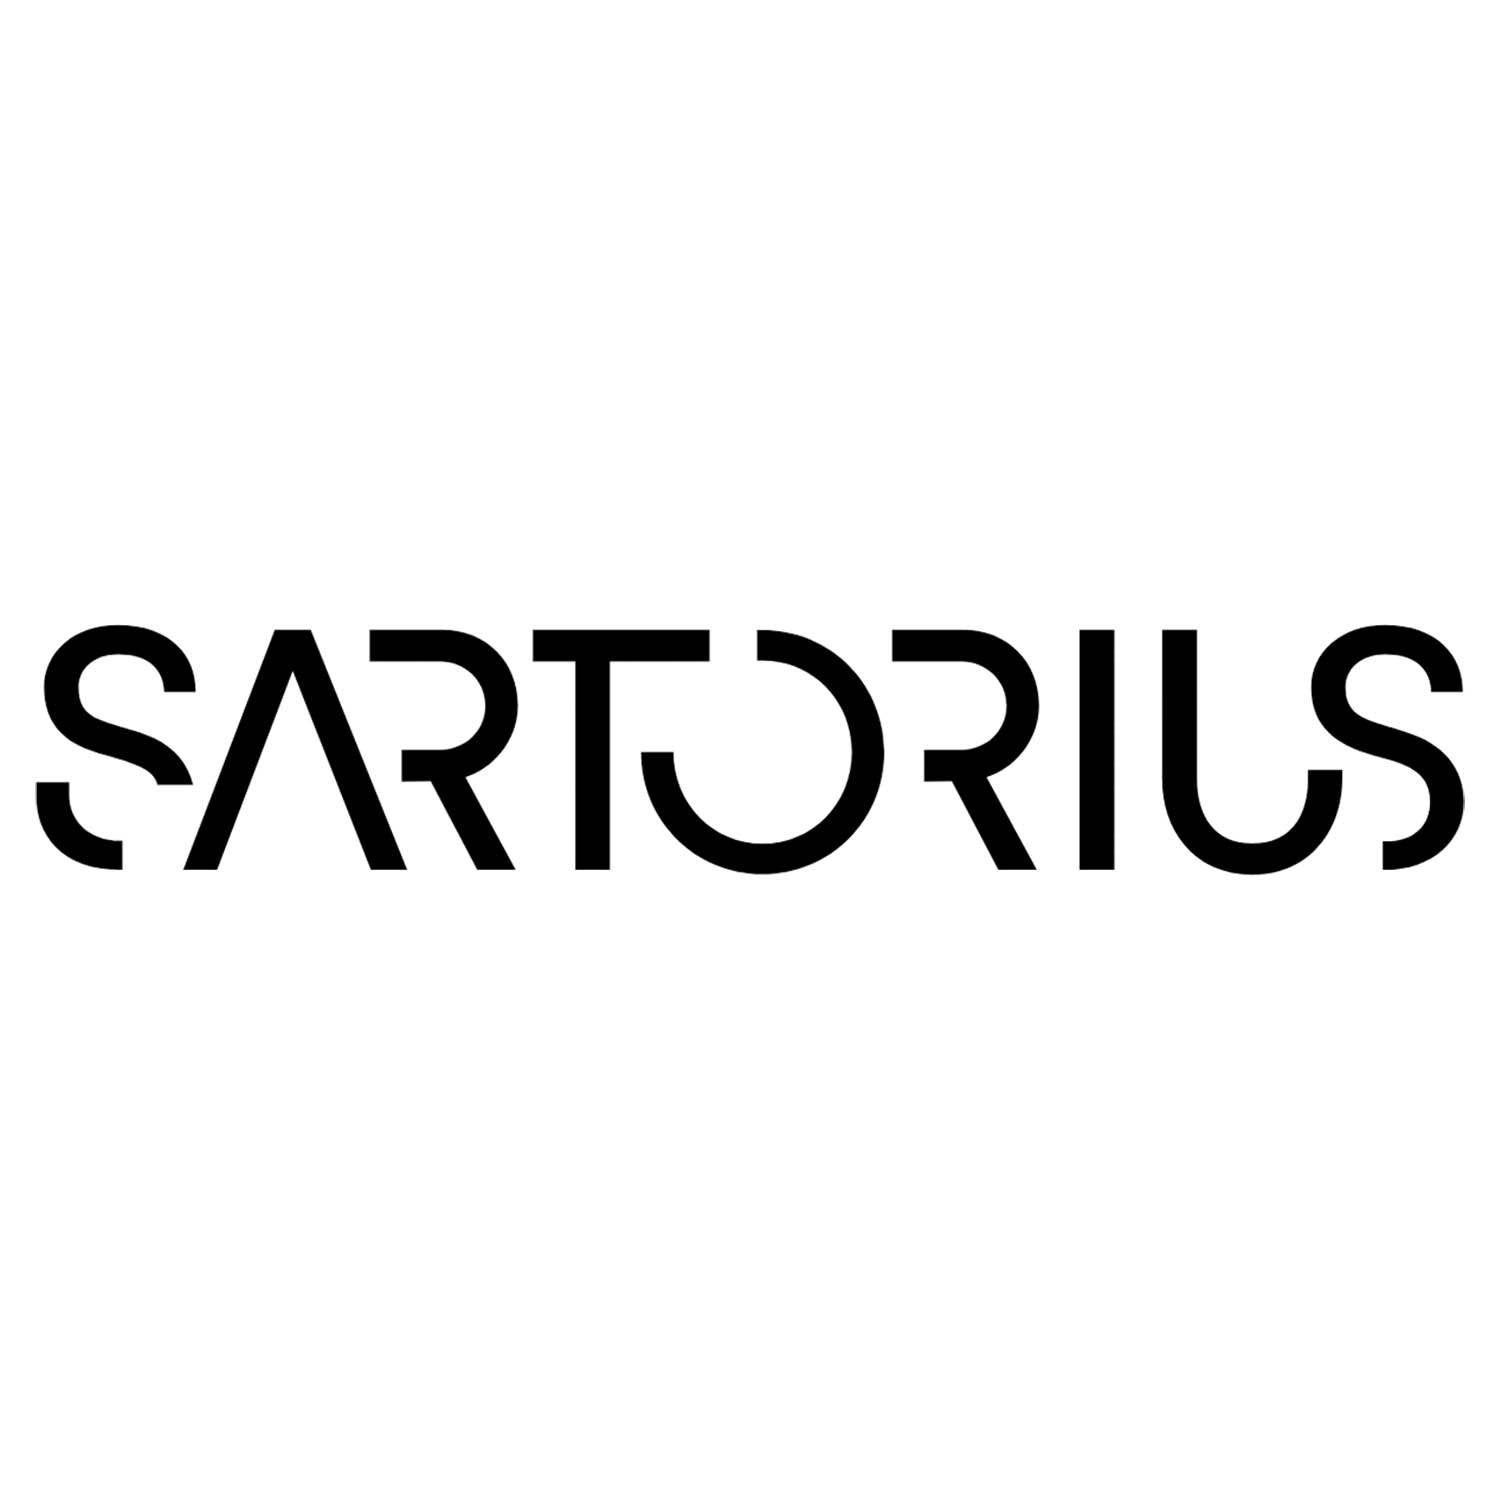 Sartorius FT-4-328-320, Technical Papers, Smooth/ Grade 100/N